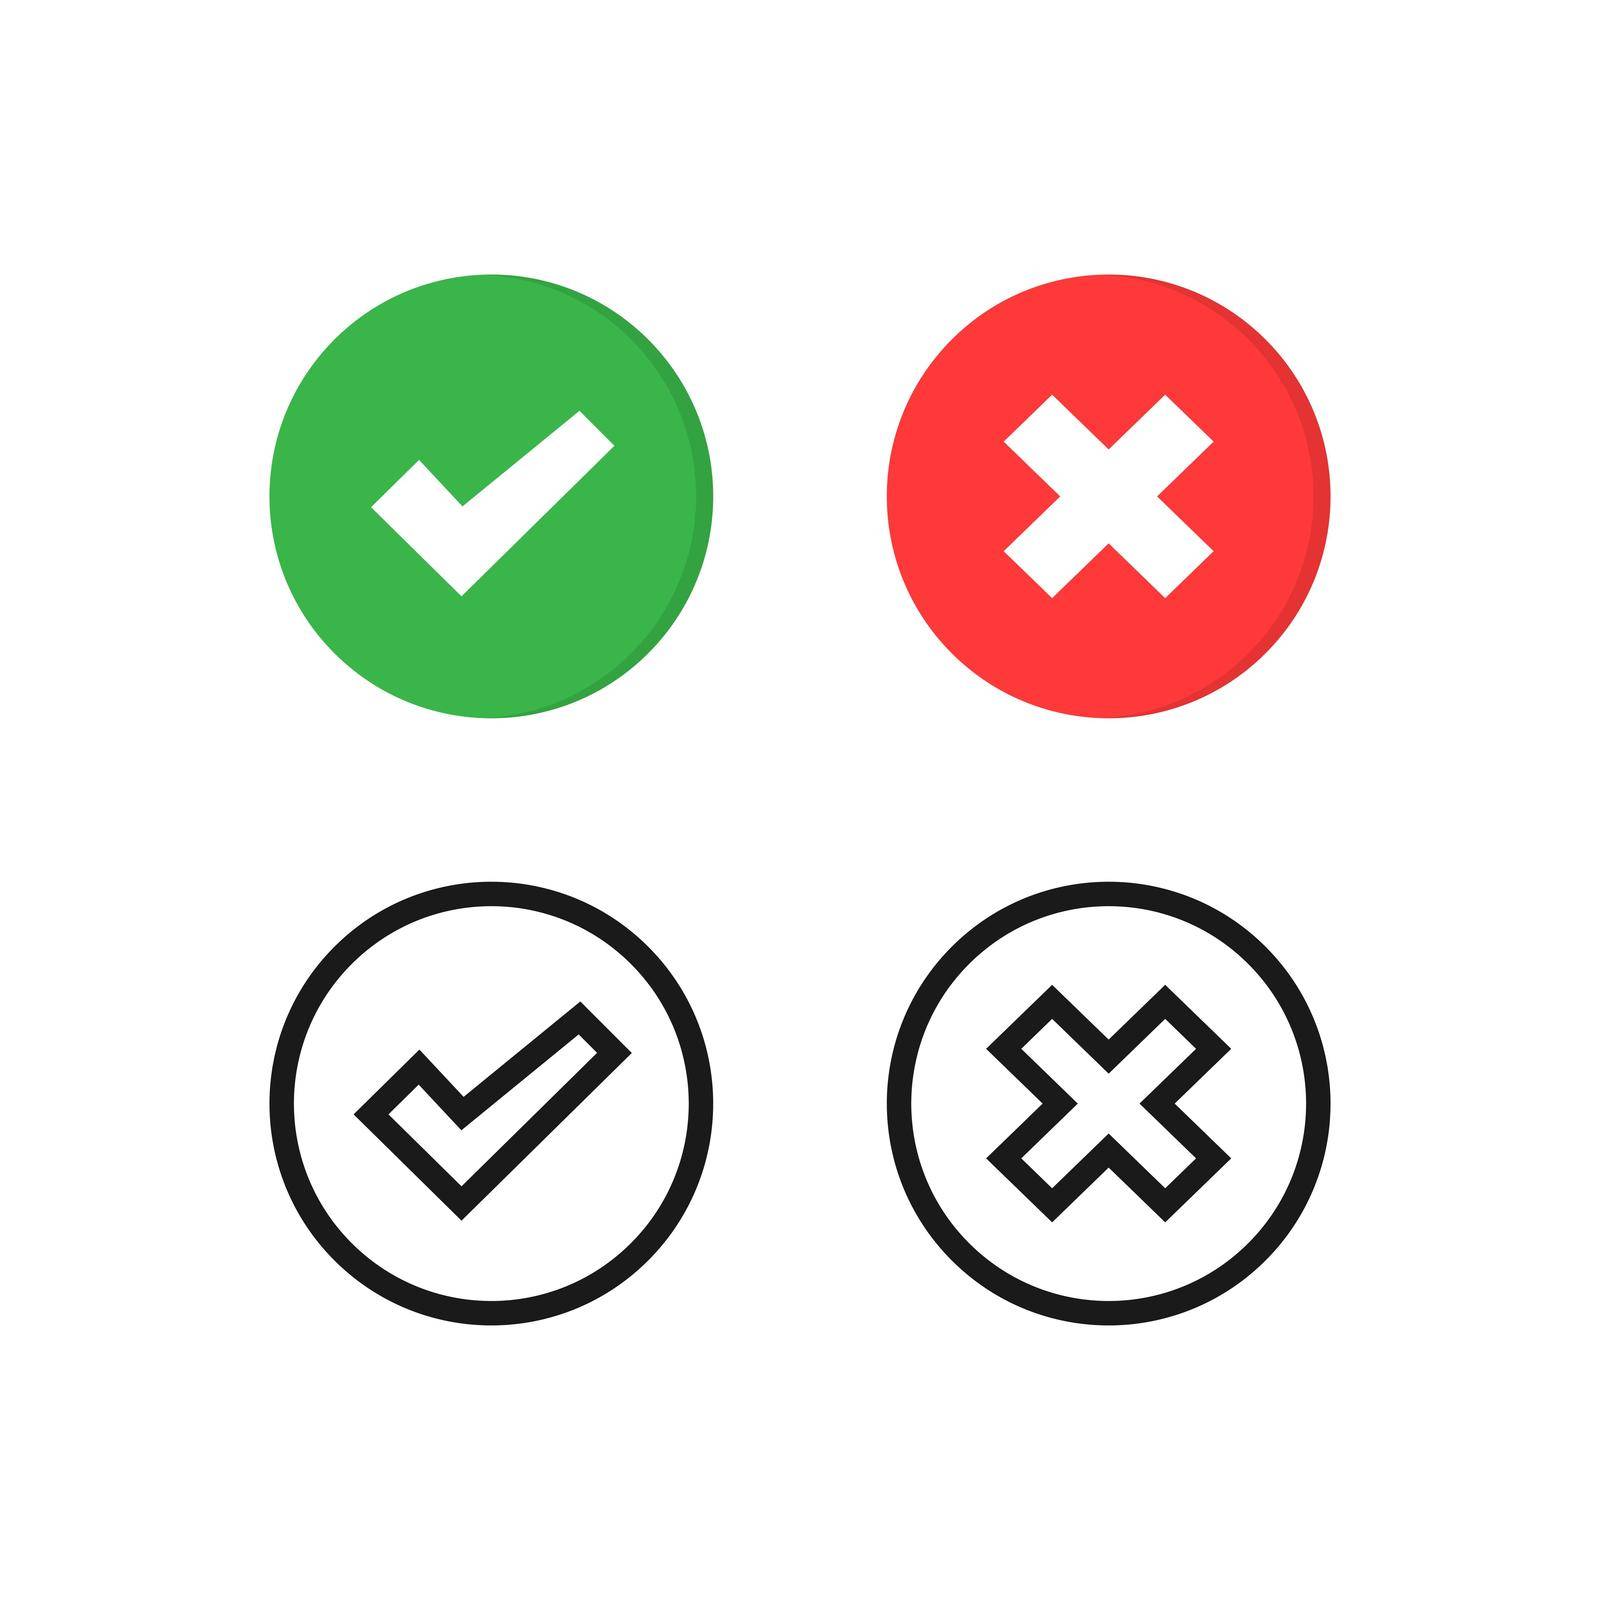 Vector checkmark icons set. Check mark and cross symbol isolated. Vector EPS10 by TopRated